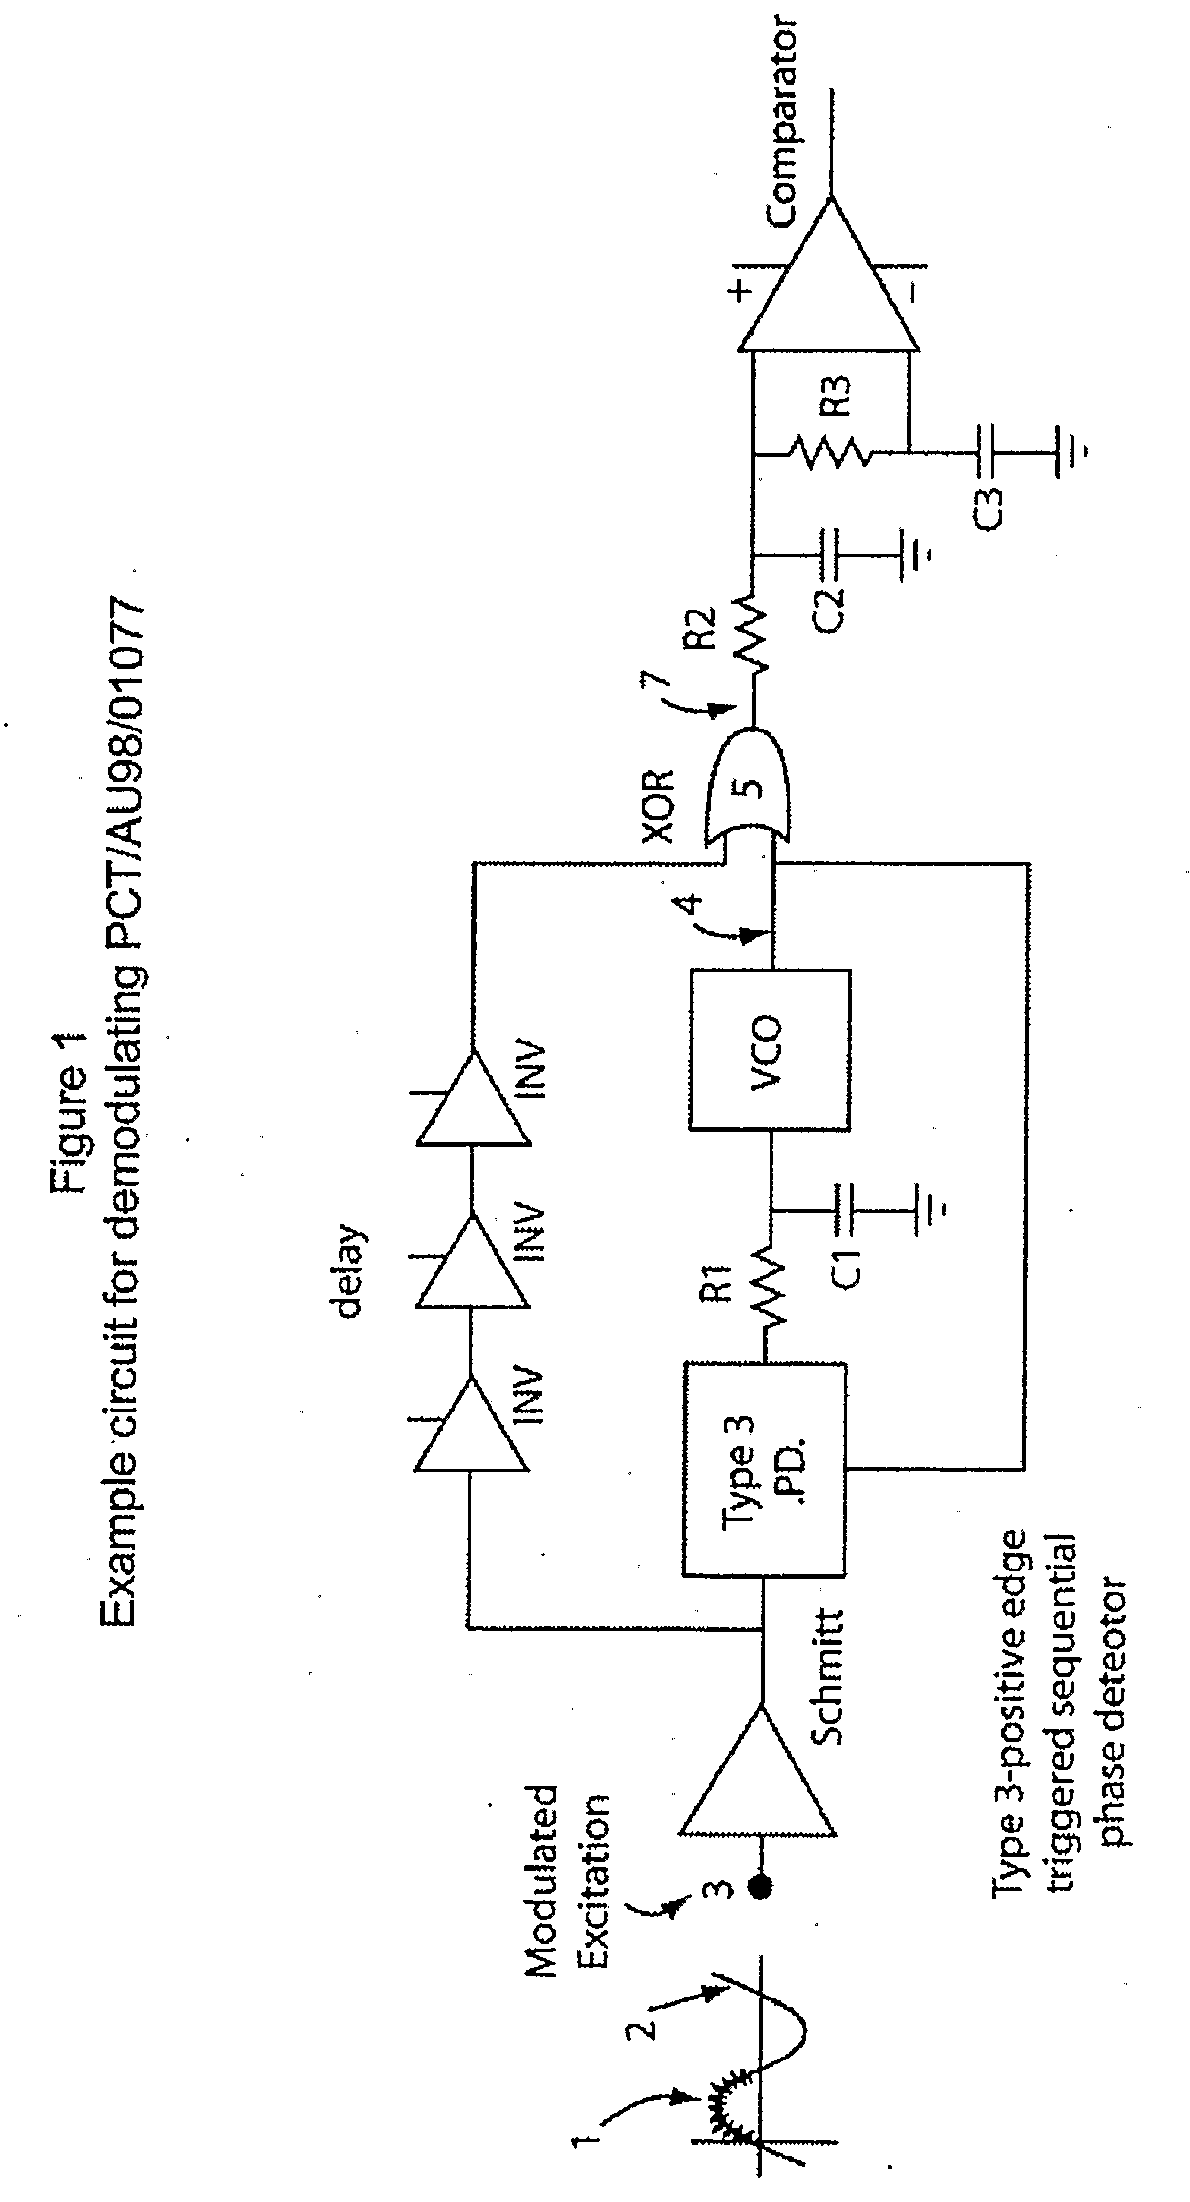 Method and Apparatus Adapted to Demodulate a Data Signal